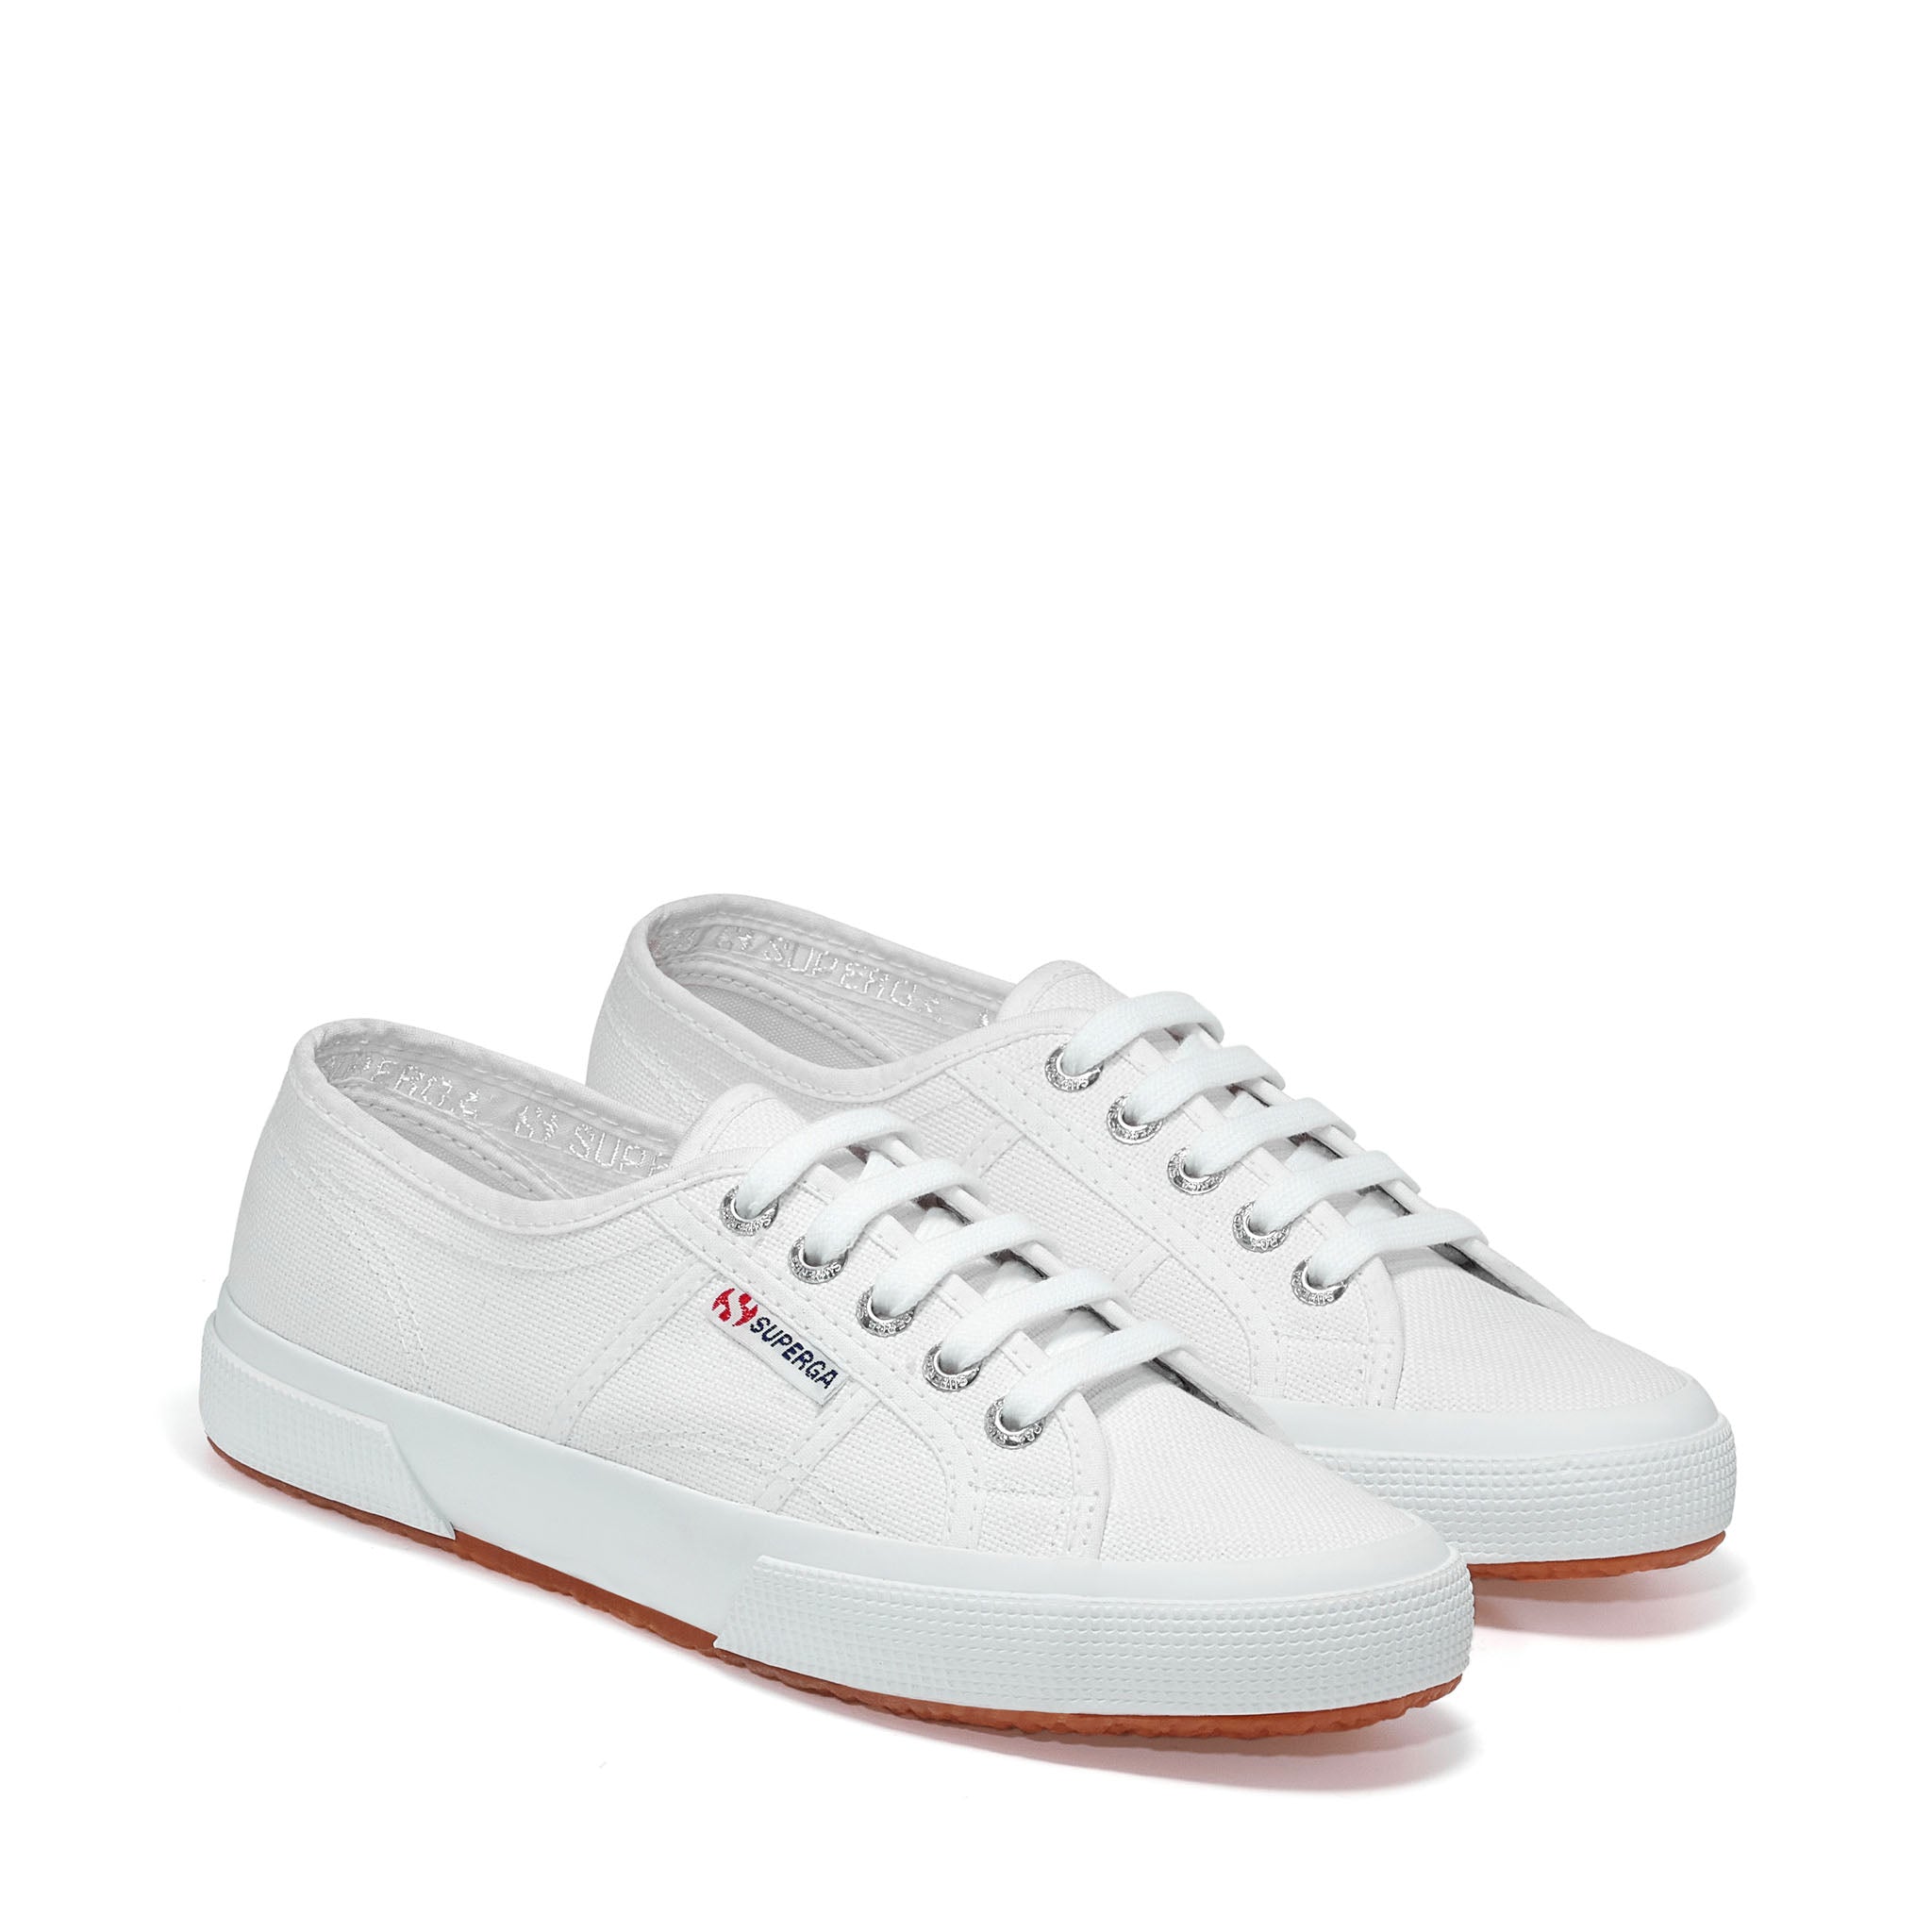 Superga 2750 Cotu Classic Sneakers - White. Front view.